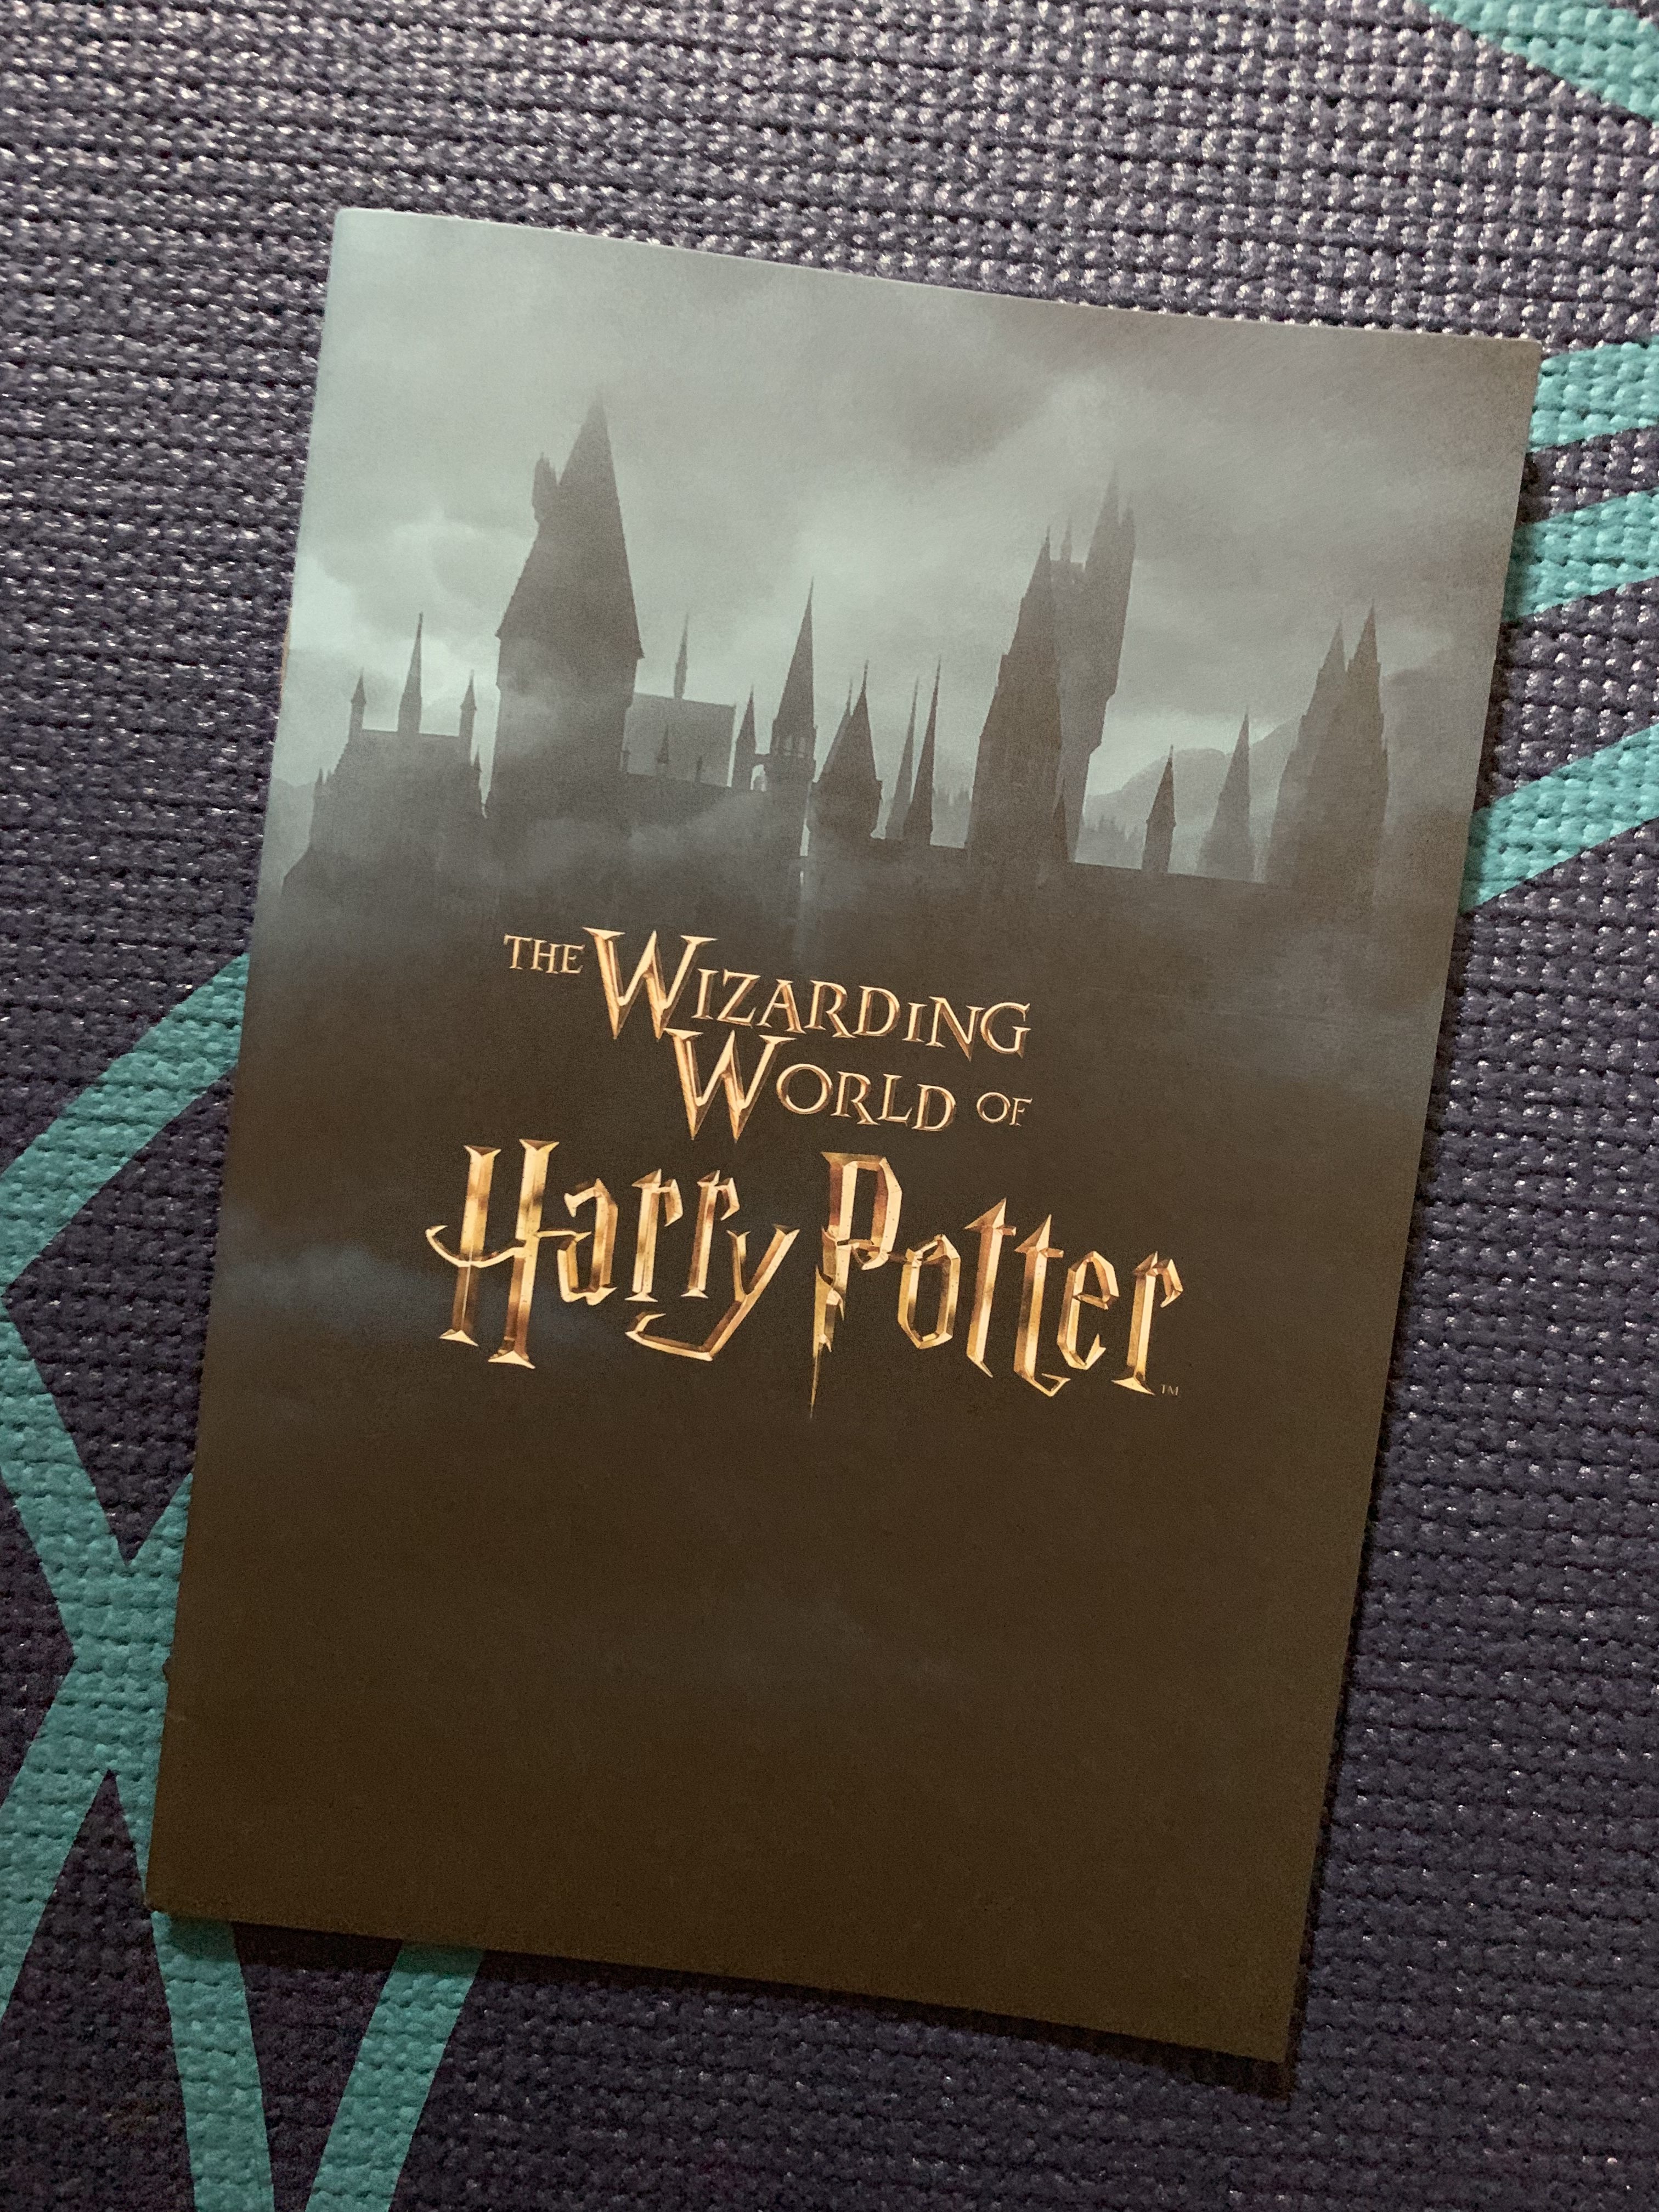 Your “Wizarding World of Harry Potter Exclusive Vacation Package” will include a special travel guide.